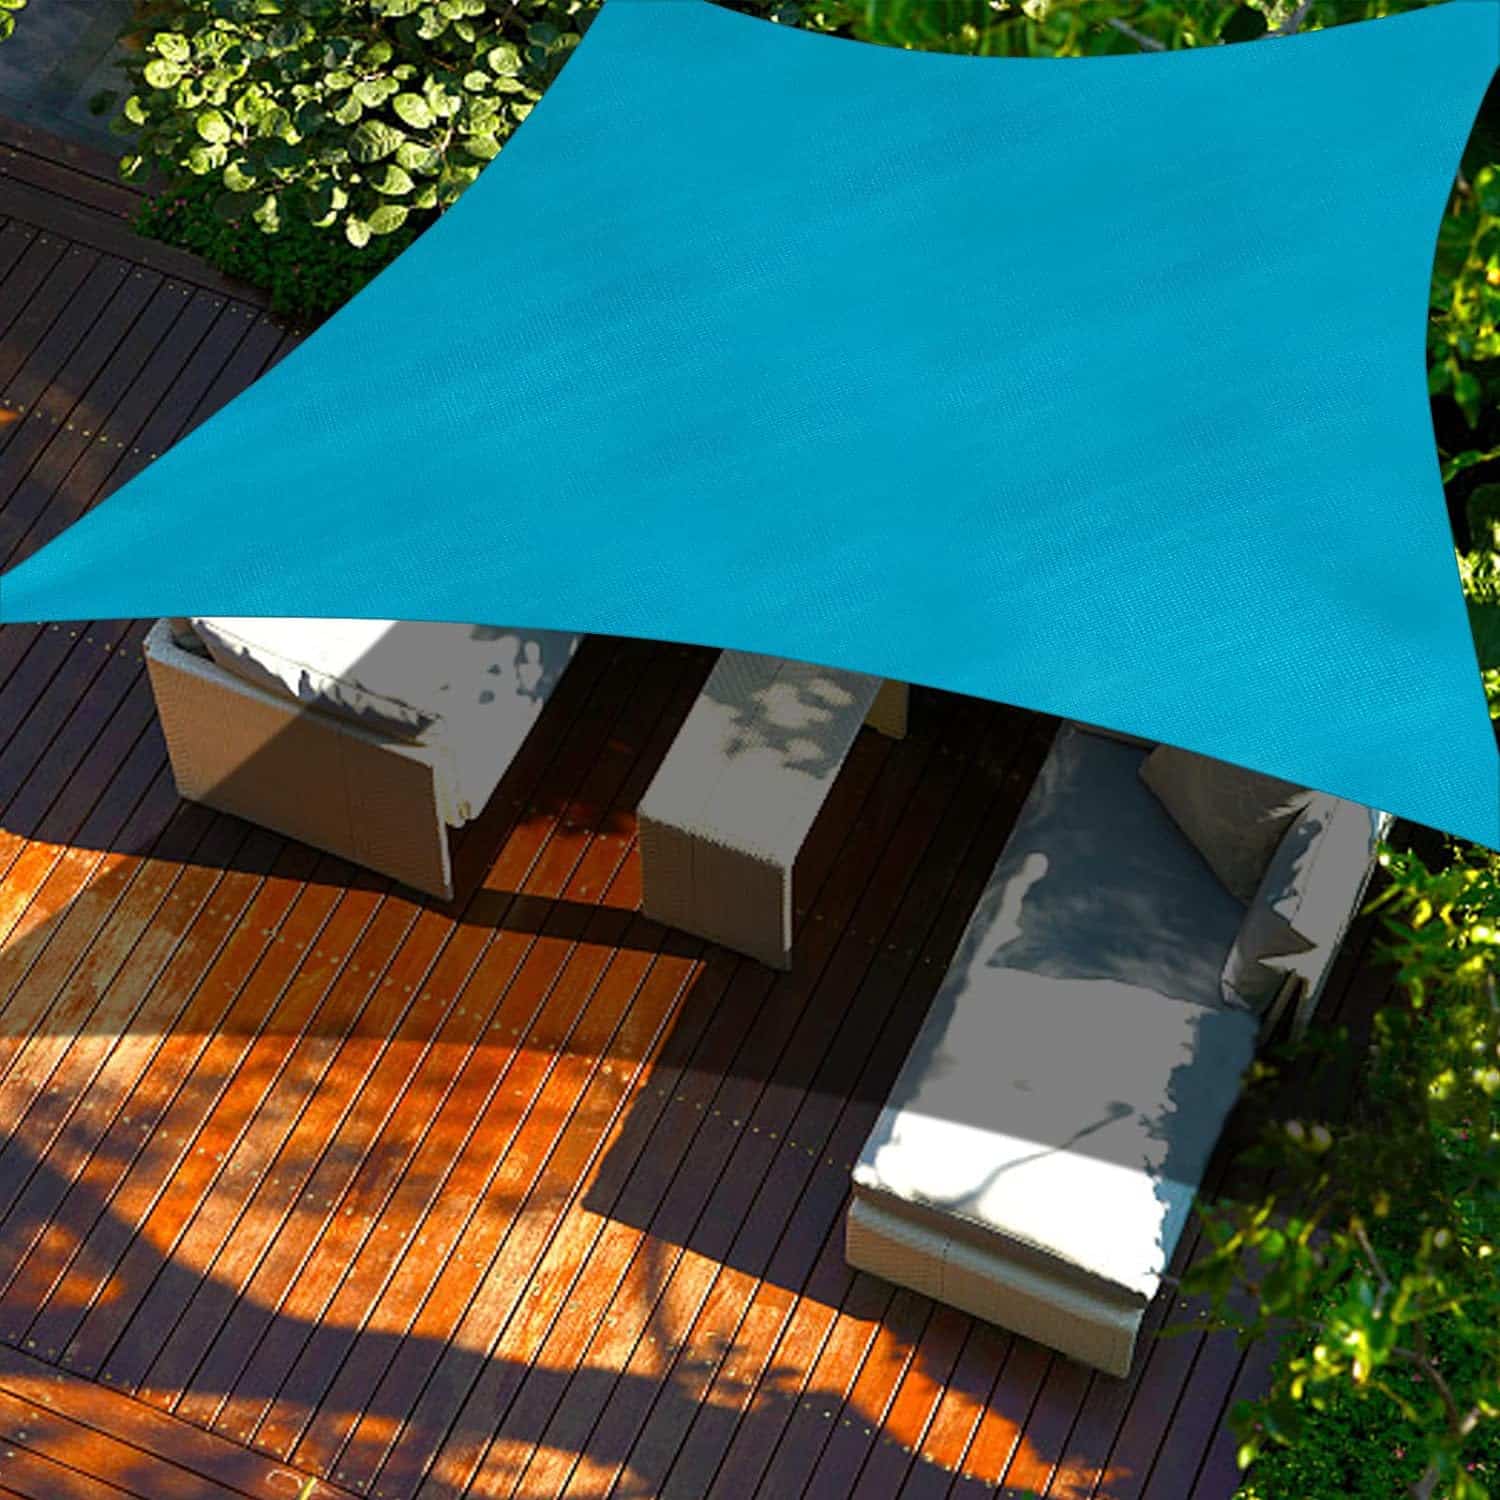 Cool Area Sun Shade Sail: Stay Cool and Protected in Style